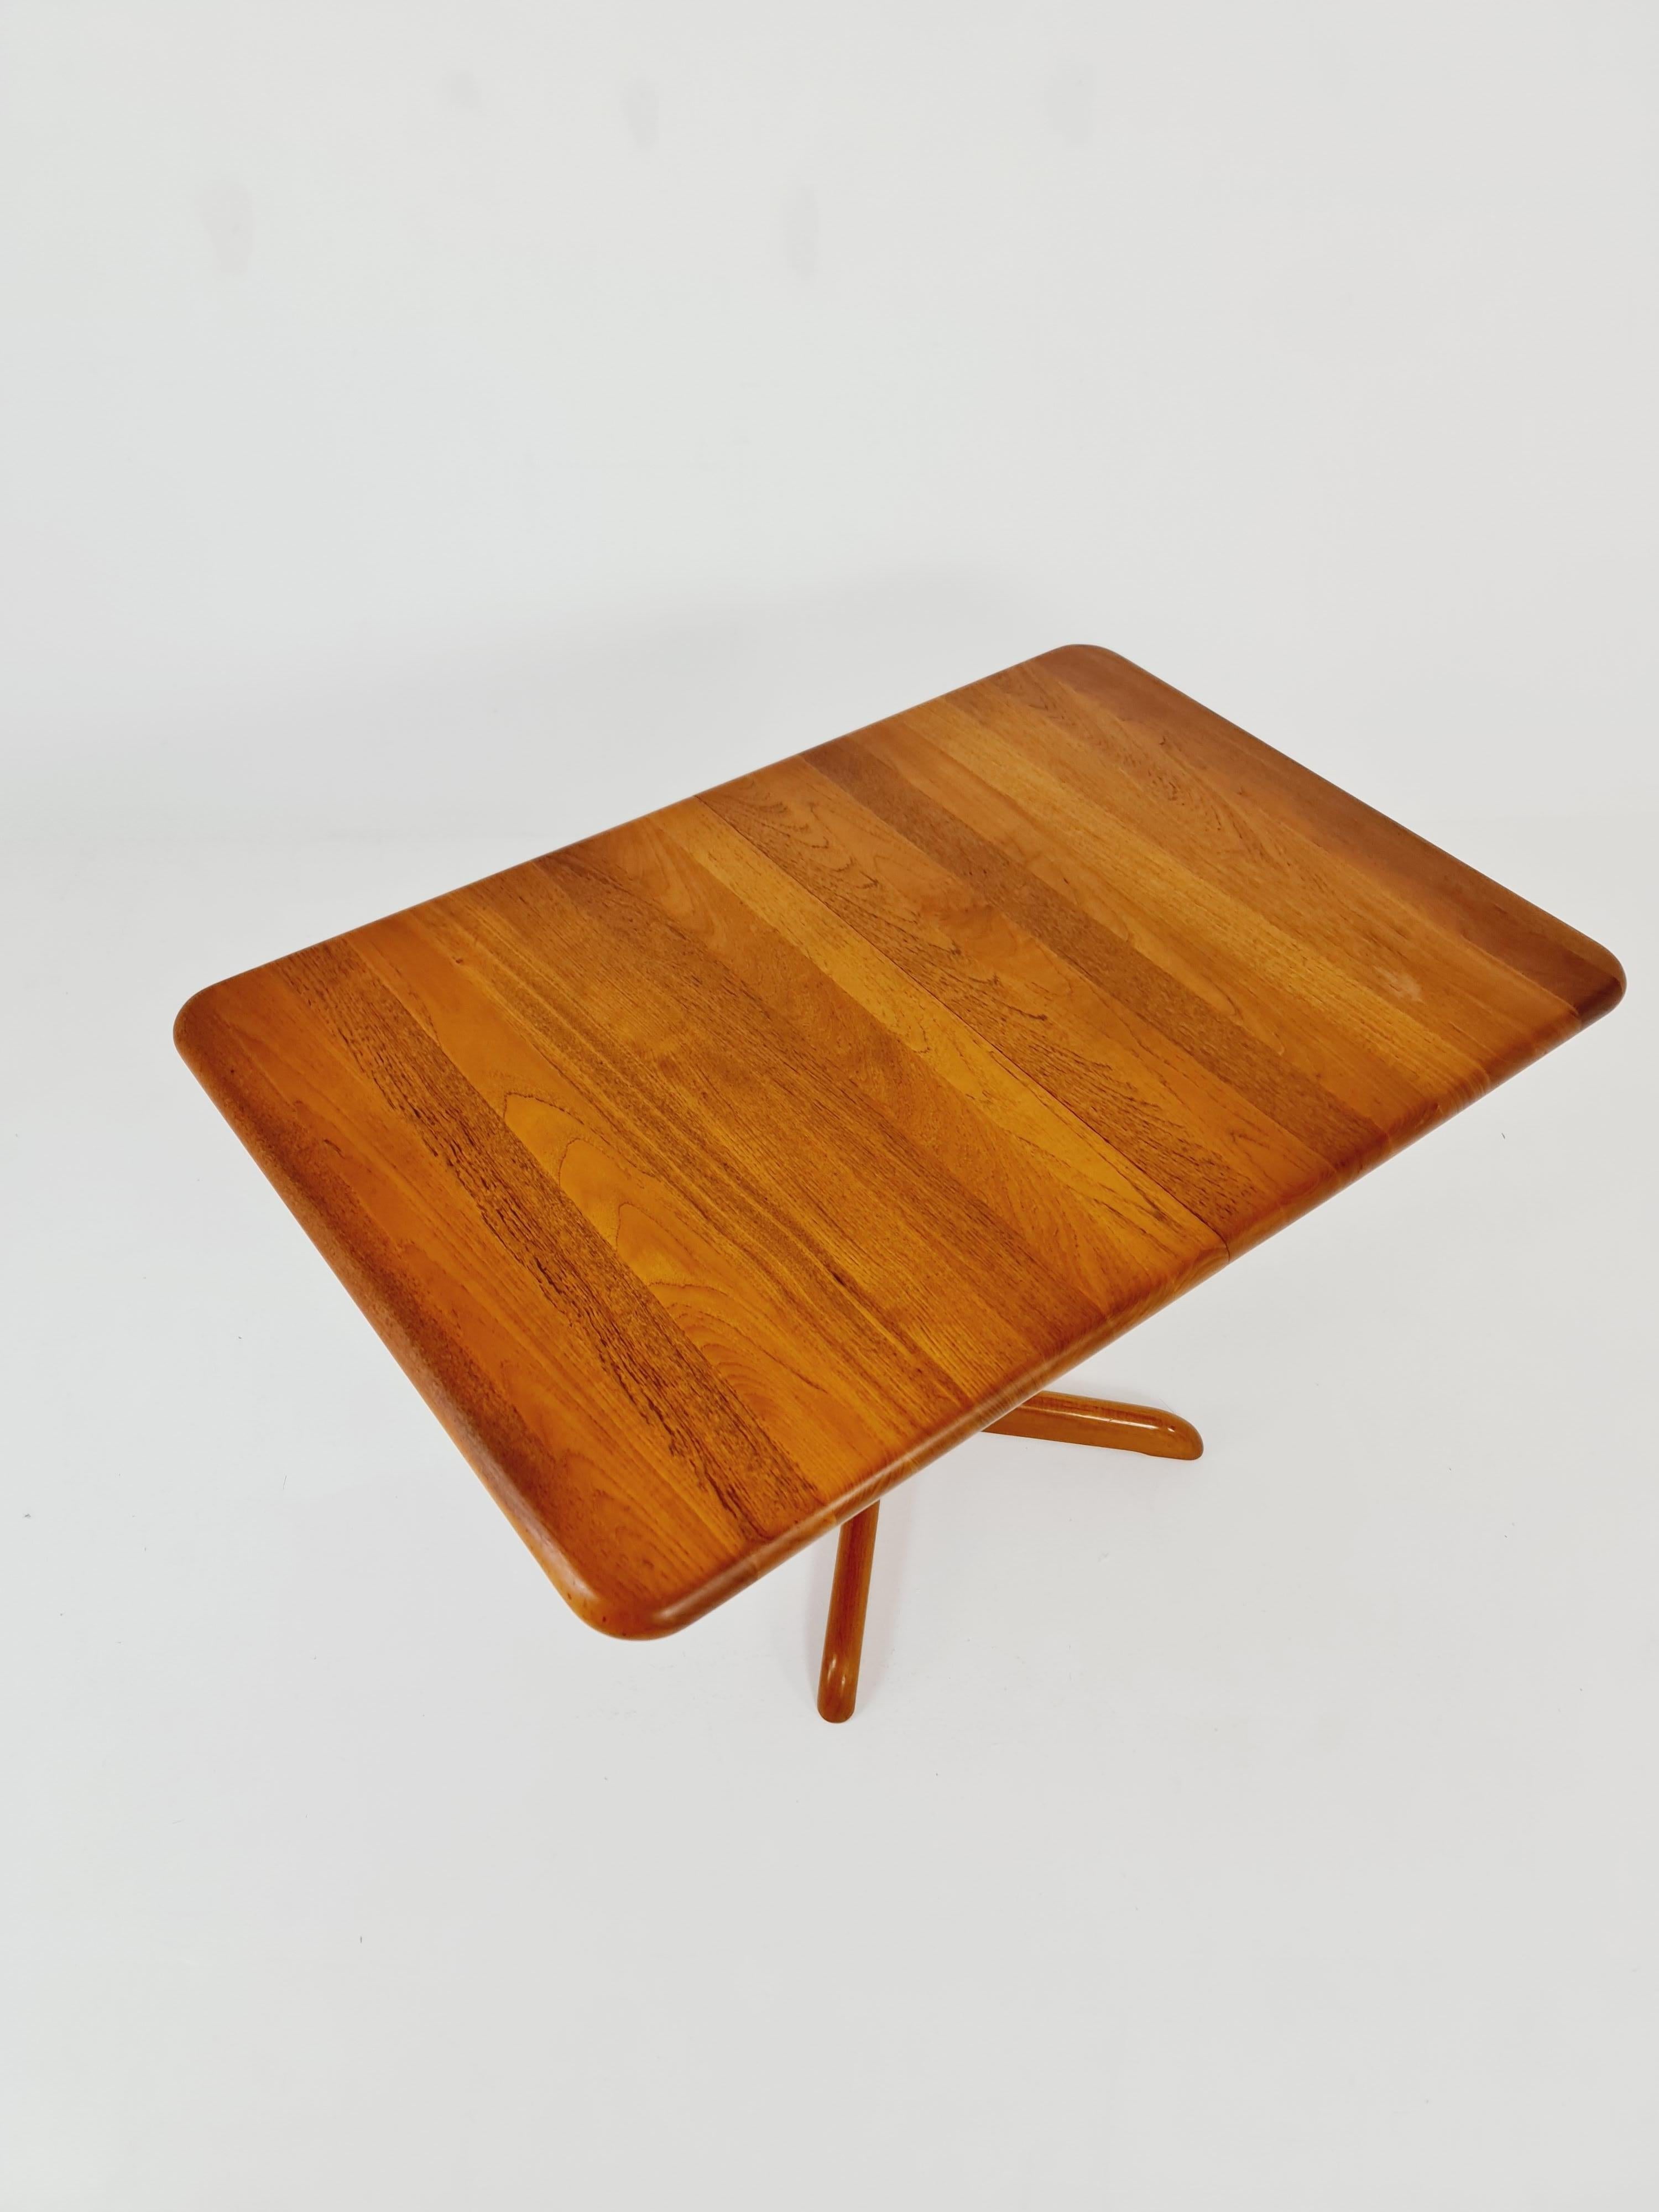 MId Century solid teak Dining Table by Gudme Møbelfabrik, 1970s

The table is in very good  condition. 

Made of Solid teak wood   

Made in Denmark 

The table can be enlarged very easily by means of the two integrated plates and thus offers enough